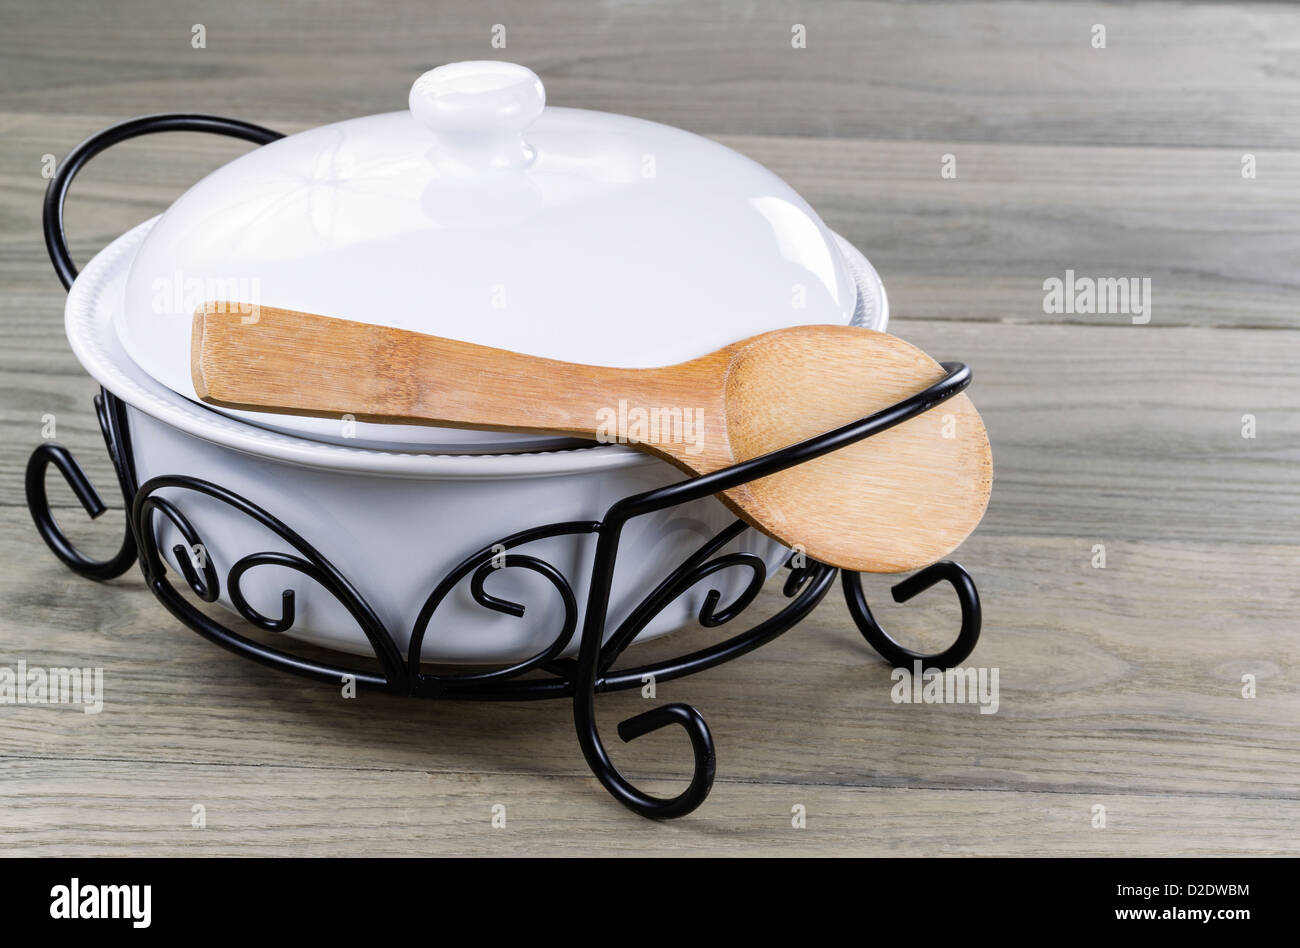 Traditional serving pot with wooden spoon on Stressed wooden table Stock Photo